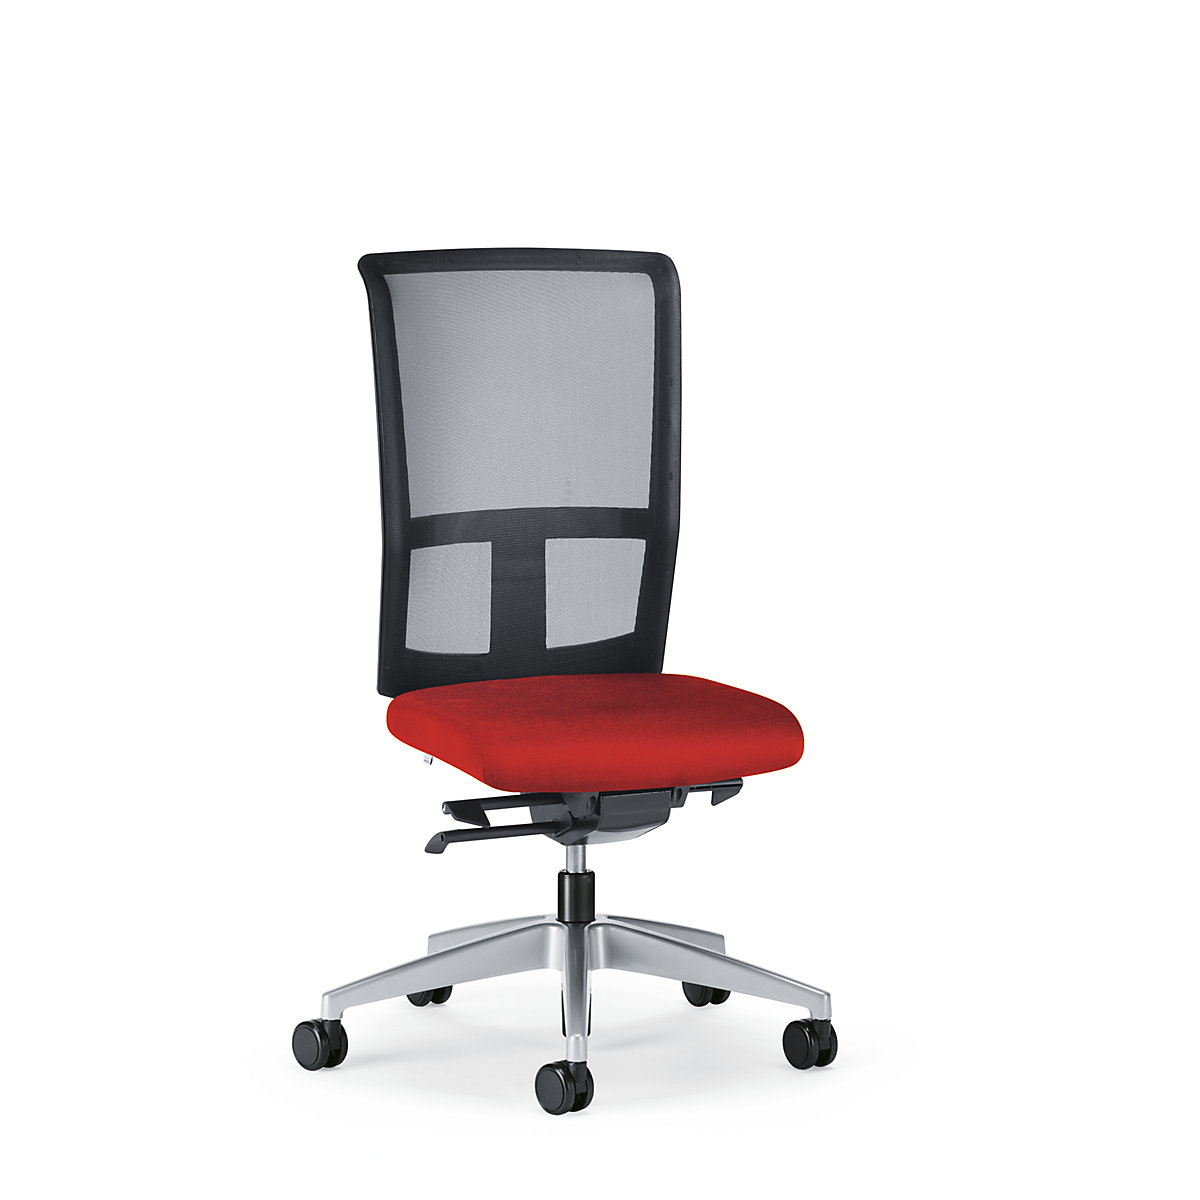 GOAL AIR office swivel chair, back rest height 545 mm – interstuhl, brilliant silver frame, with soft castors, flame red, seat depth 410 mm-5